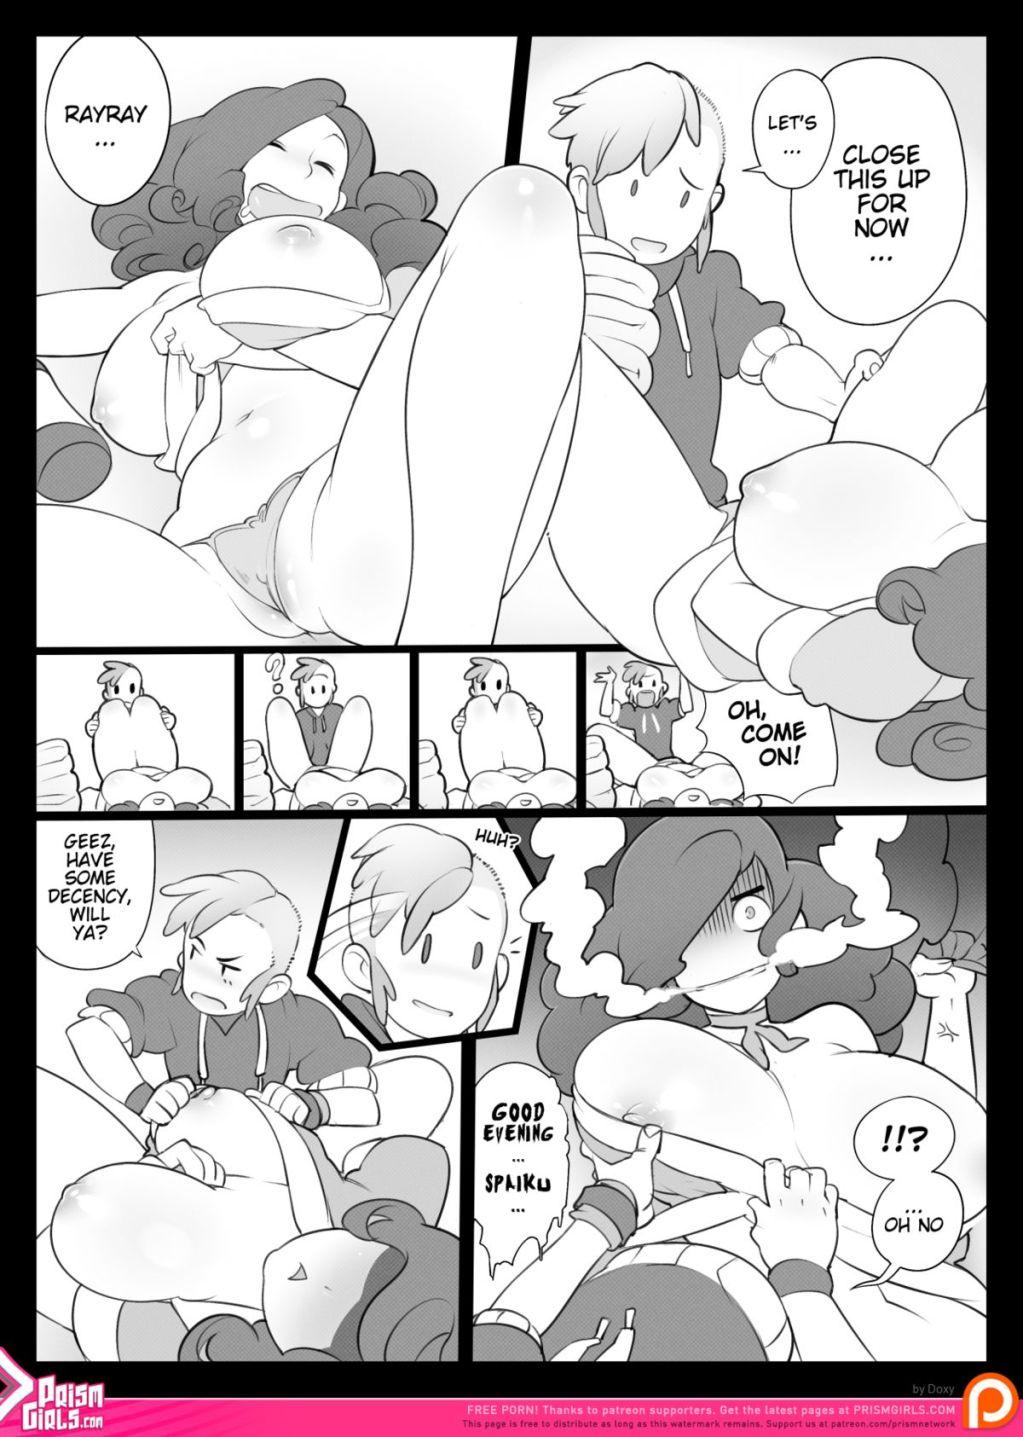 Fishnets In a Pinch! Duro - Page 2